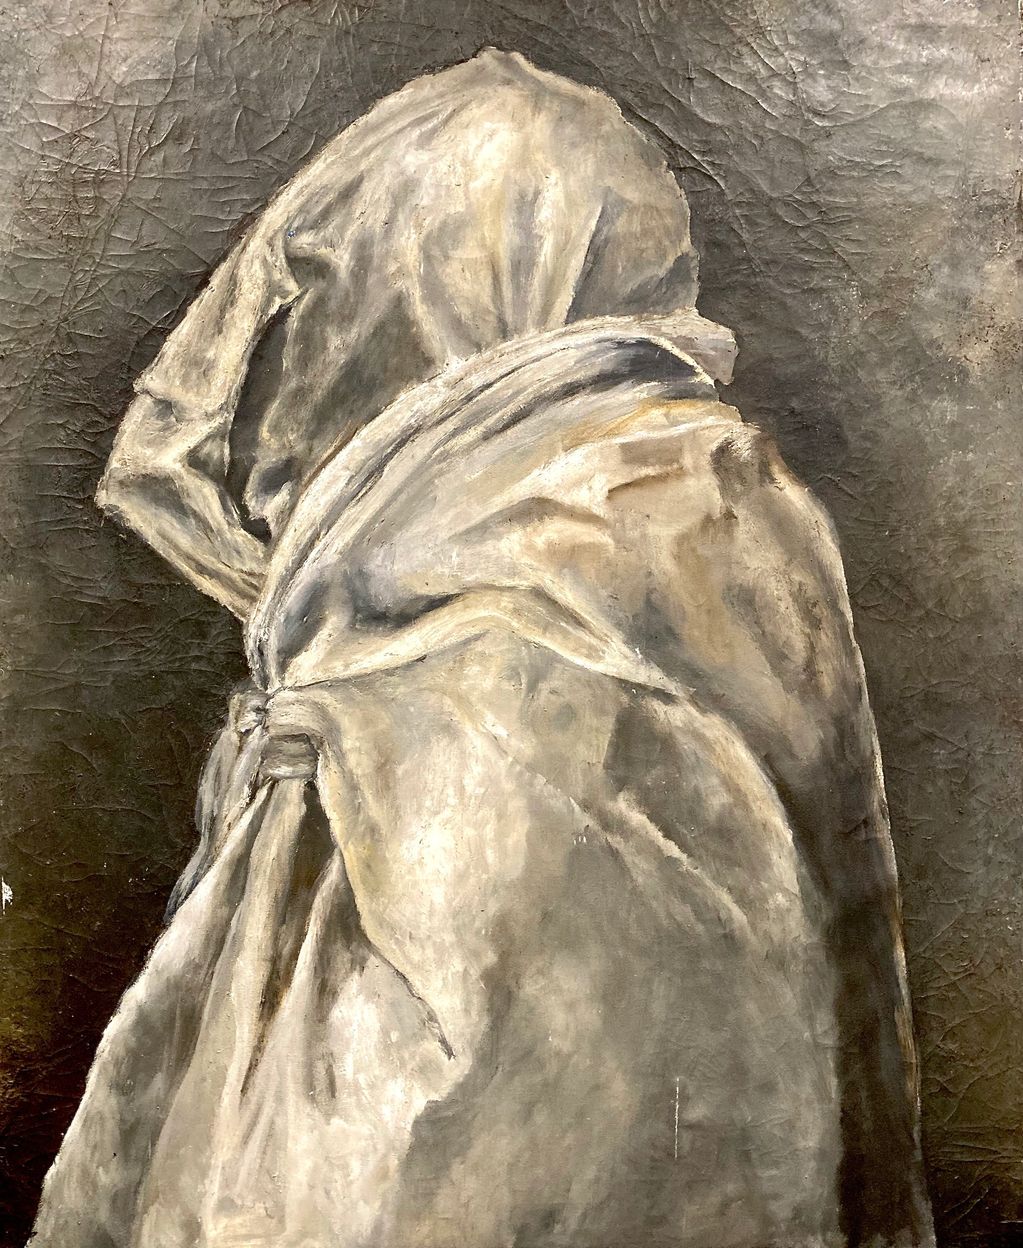 oil on canvas, 35"x43", 1985.
earth tones depicting a wrapped figure in profile view.